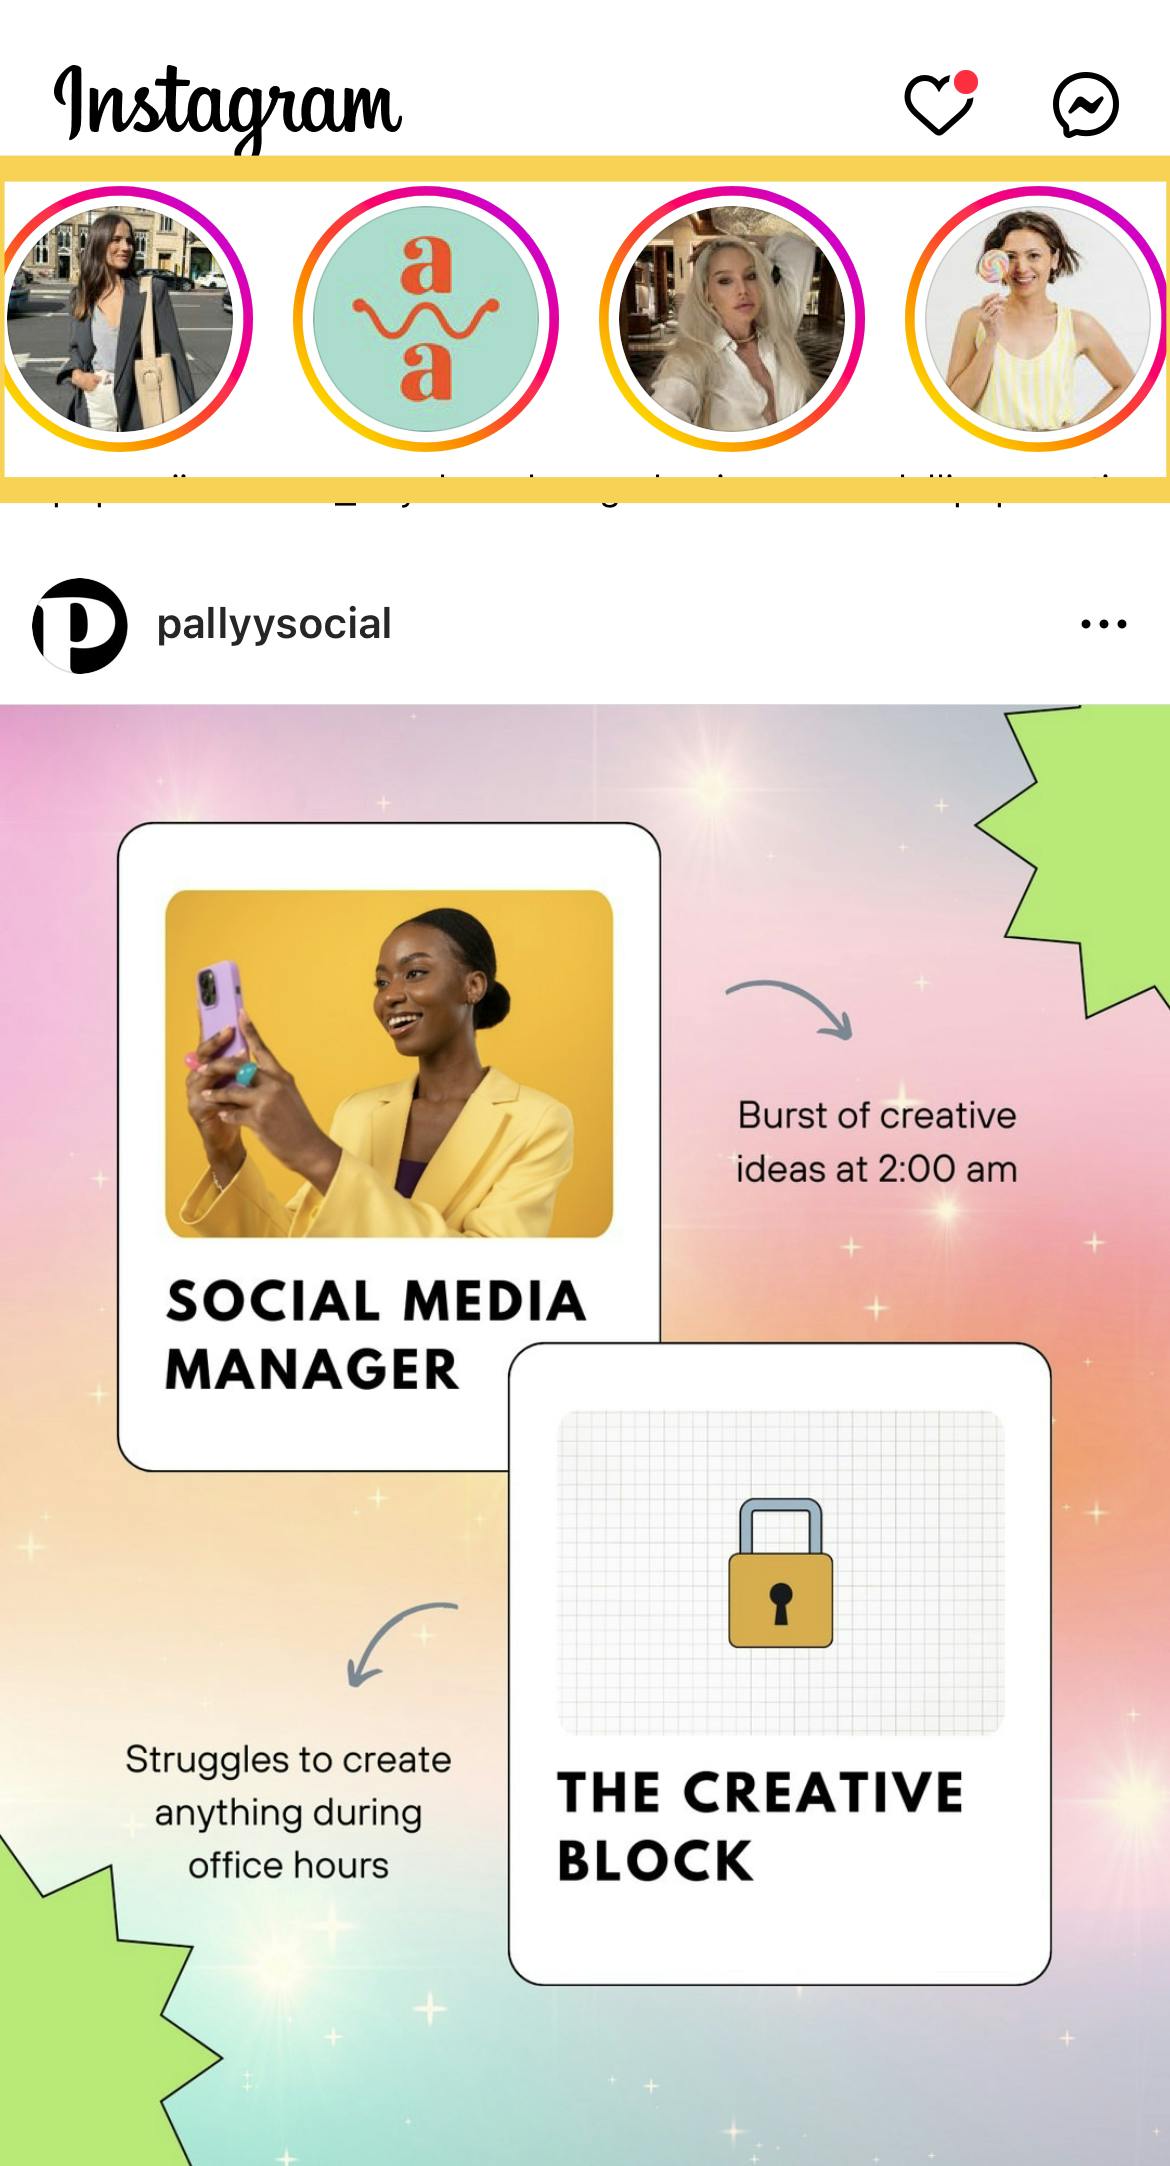 Instagram stories shown in the top row 